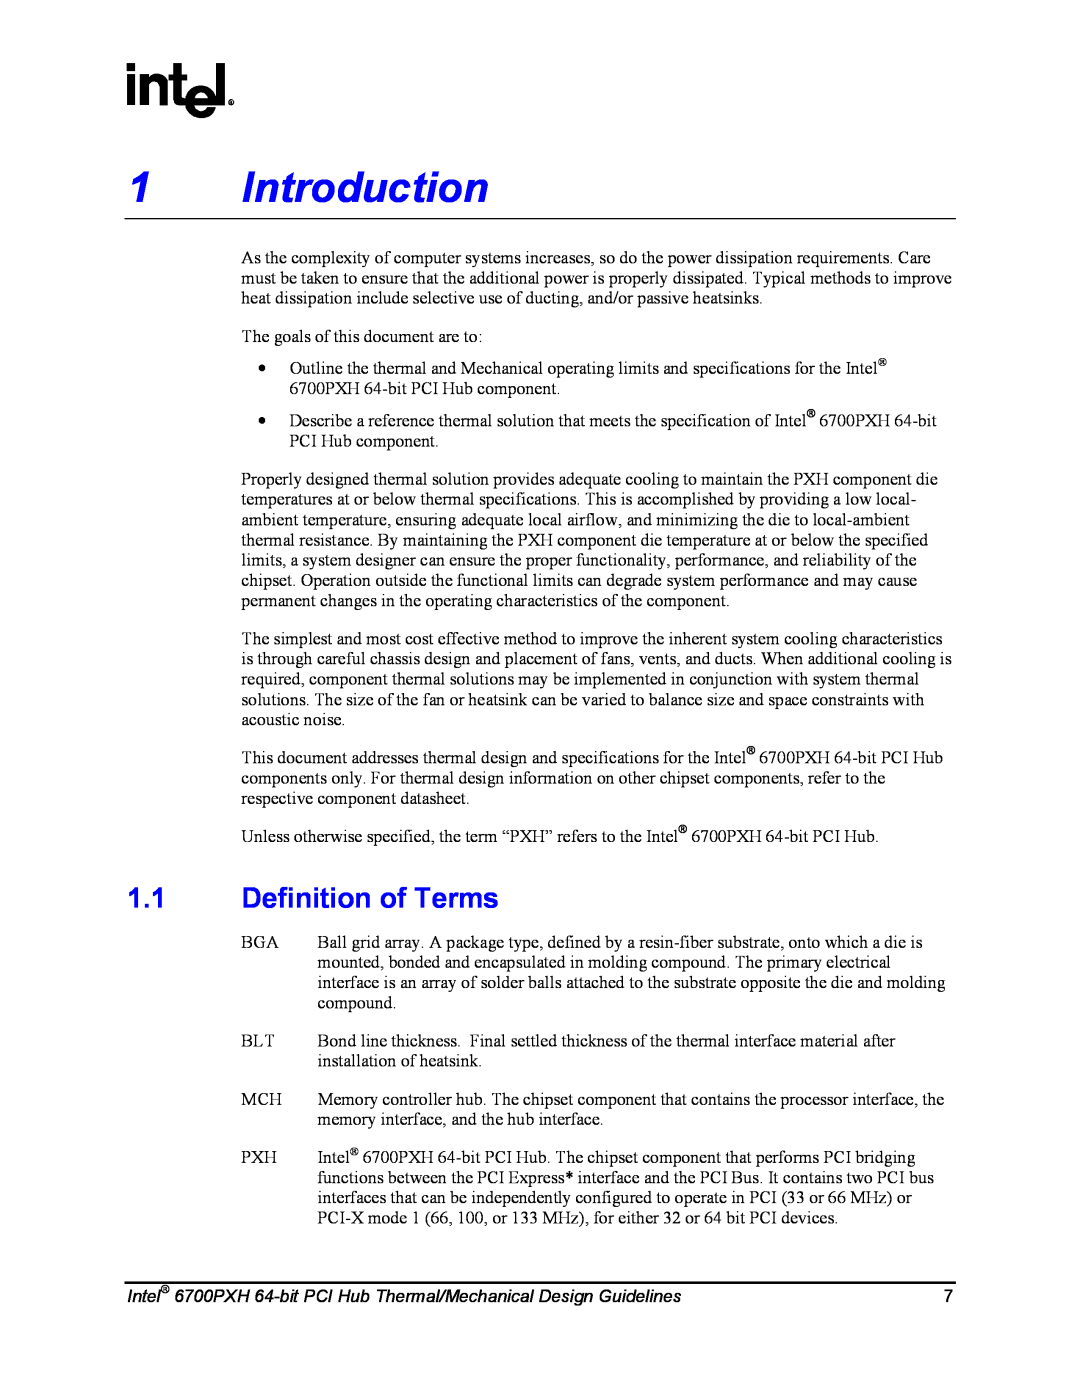 Intel manual Introduction, Definition of Terms, Intel 6700PXH 64-bit PCI Hub Thermal/Mechanical Design Guidelines 